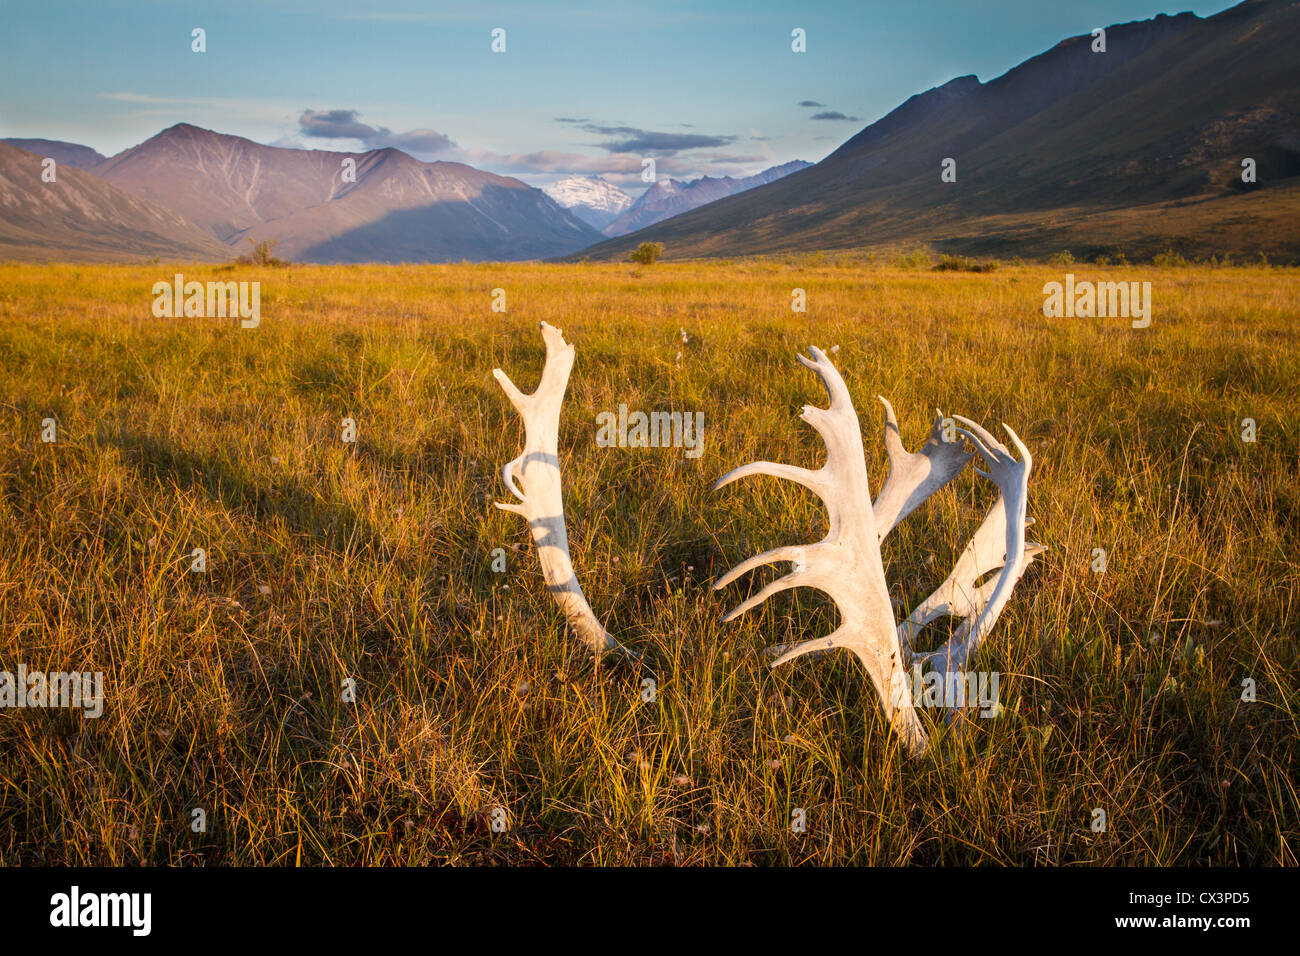 Caribou Skin Clothing - Gates Of The Arctic National Park